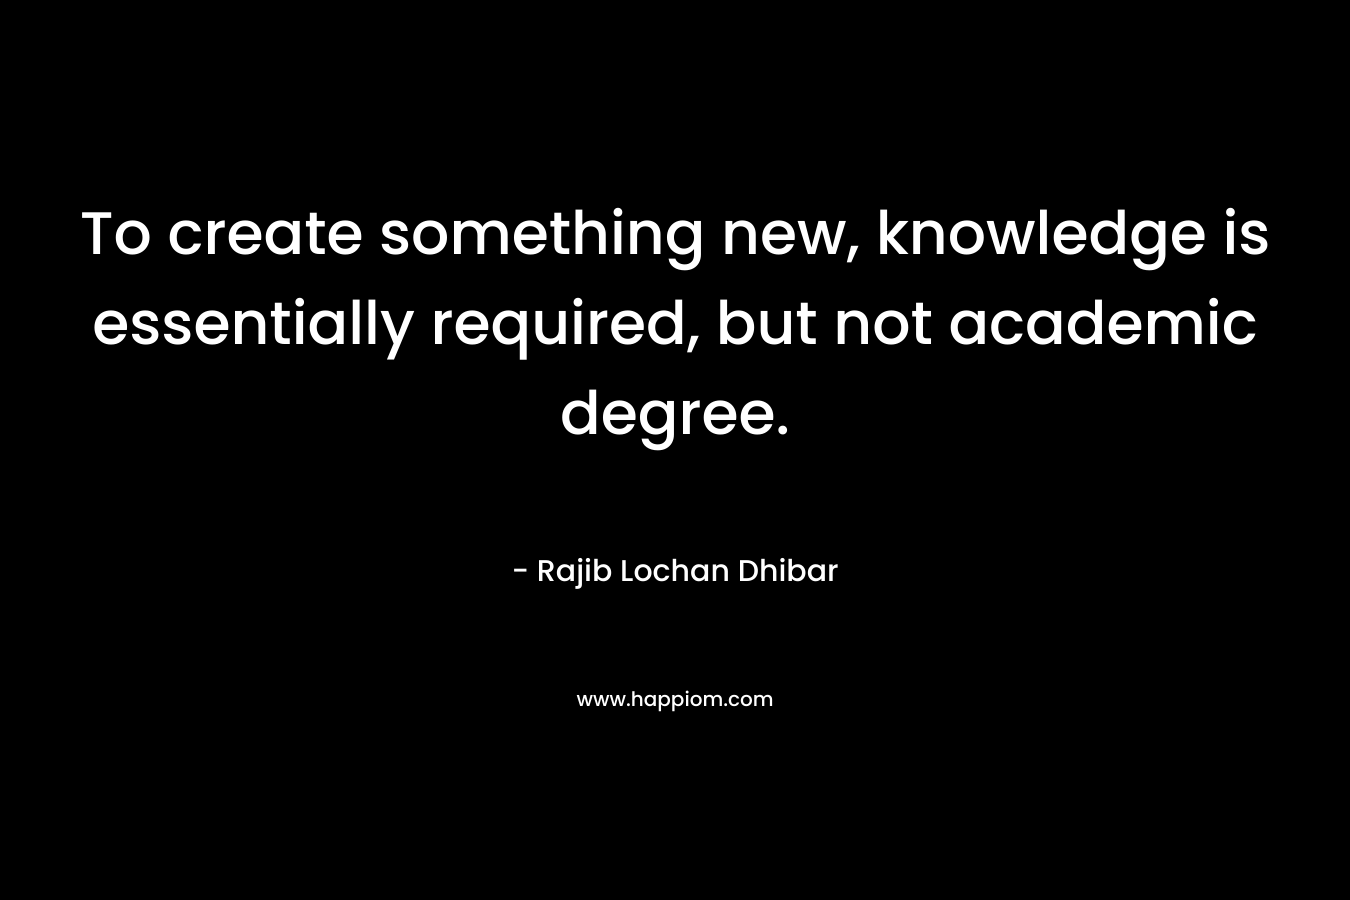 To create something new, knowledge is essentially required, but not academic degree.